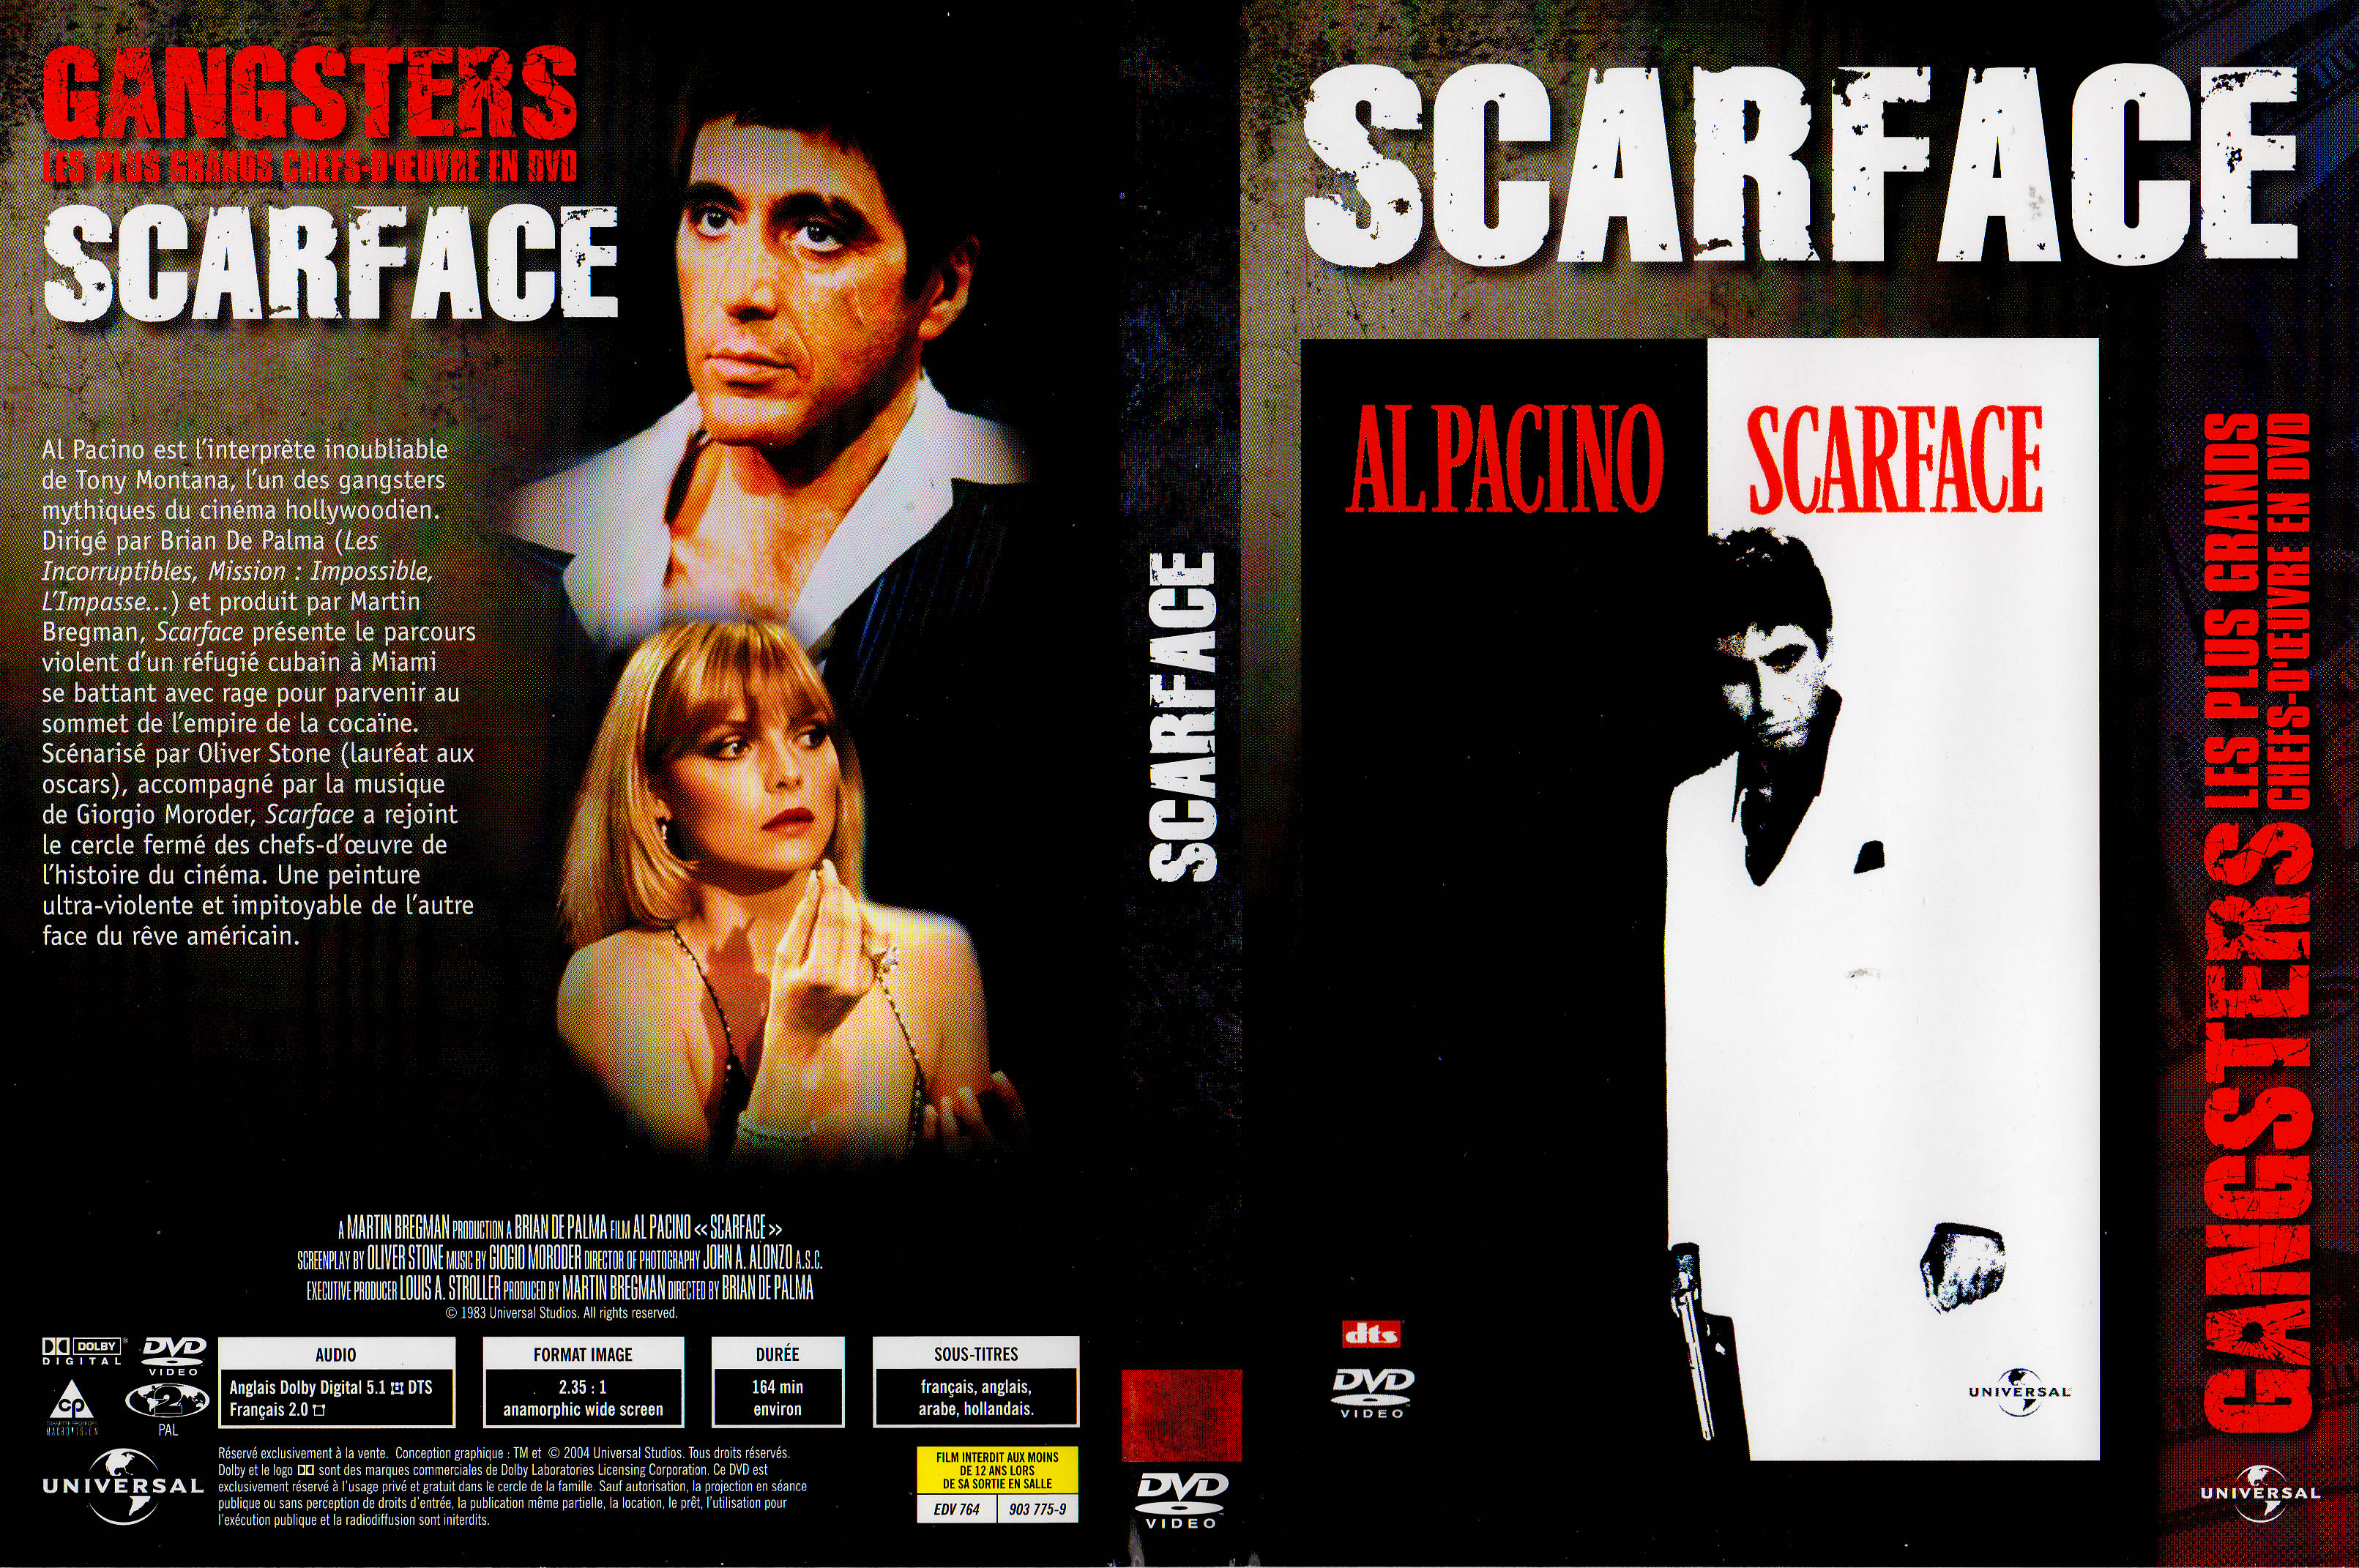 Jaquette DVD Scarface v5